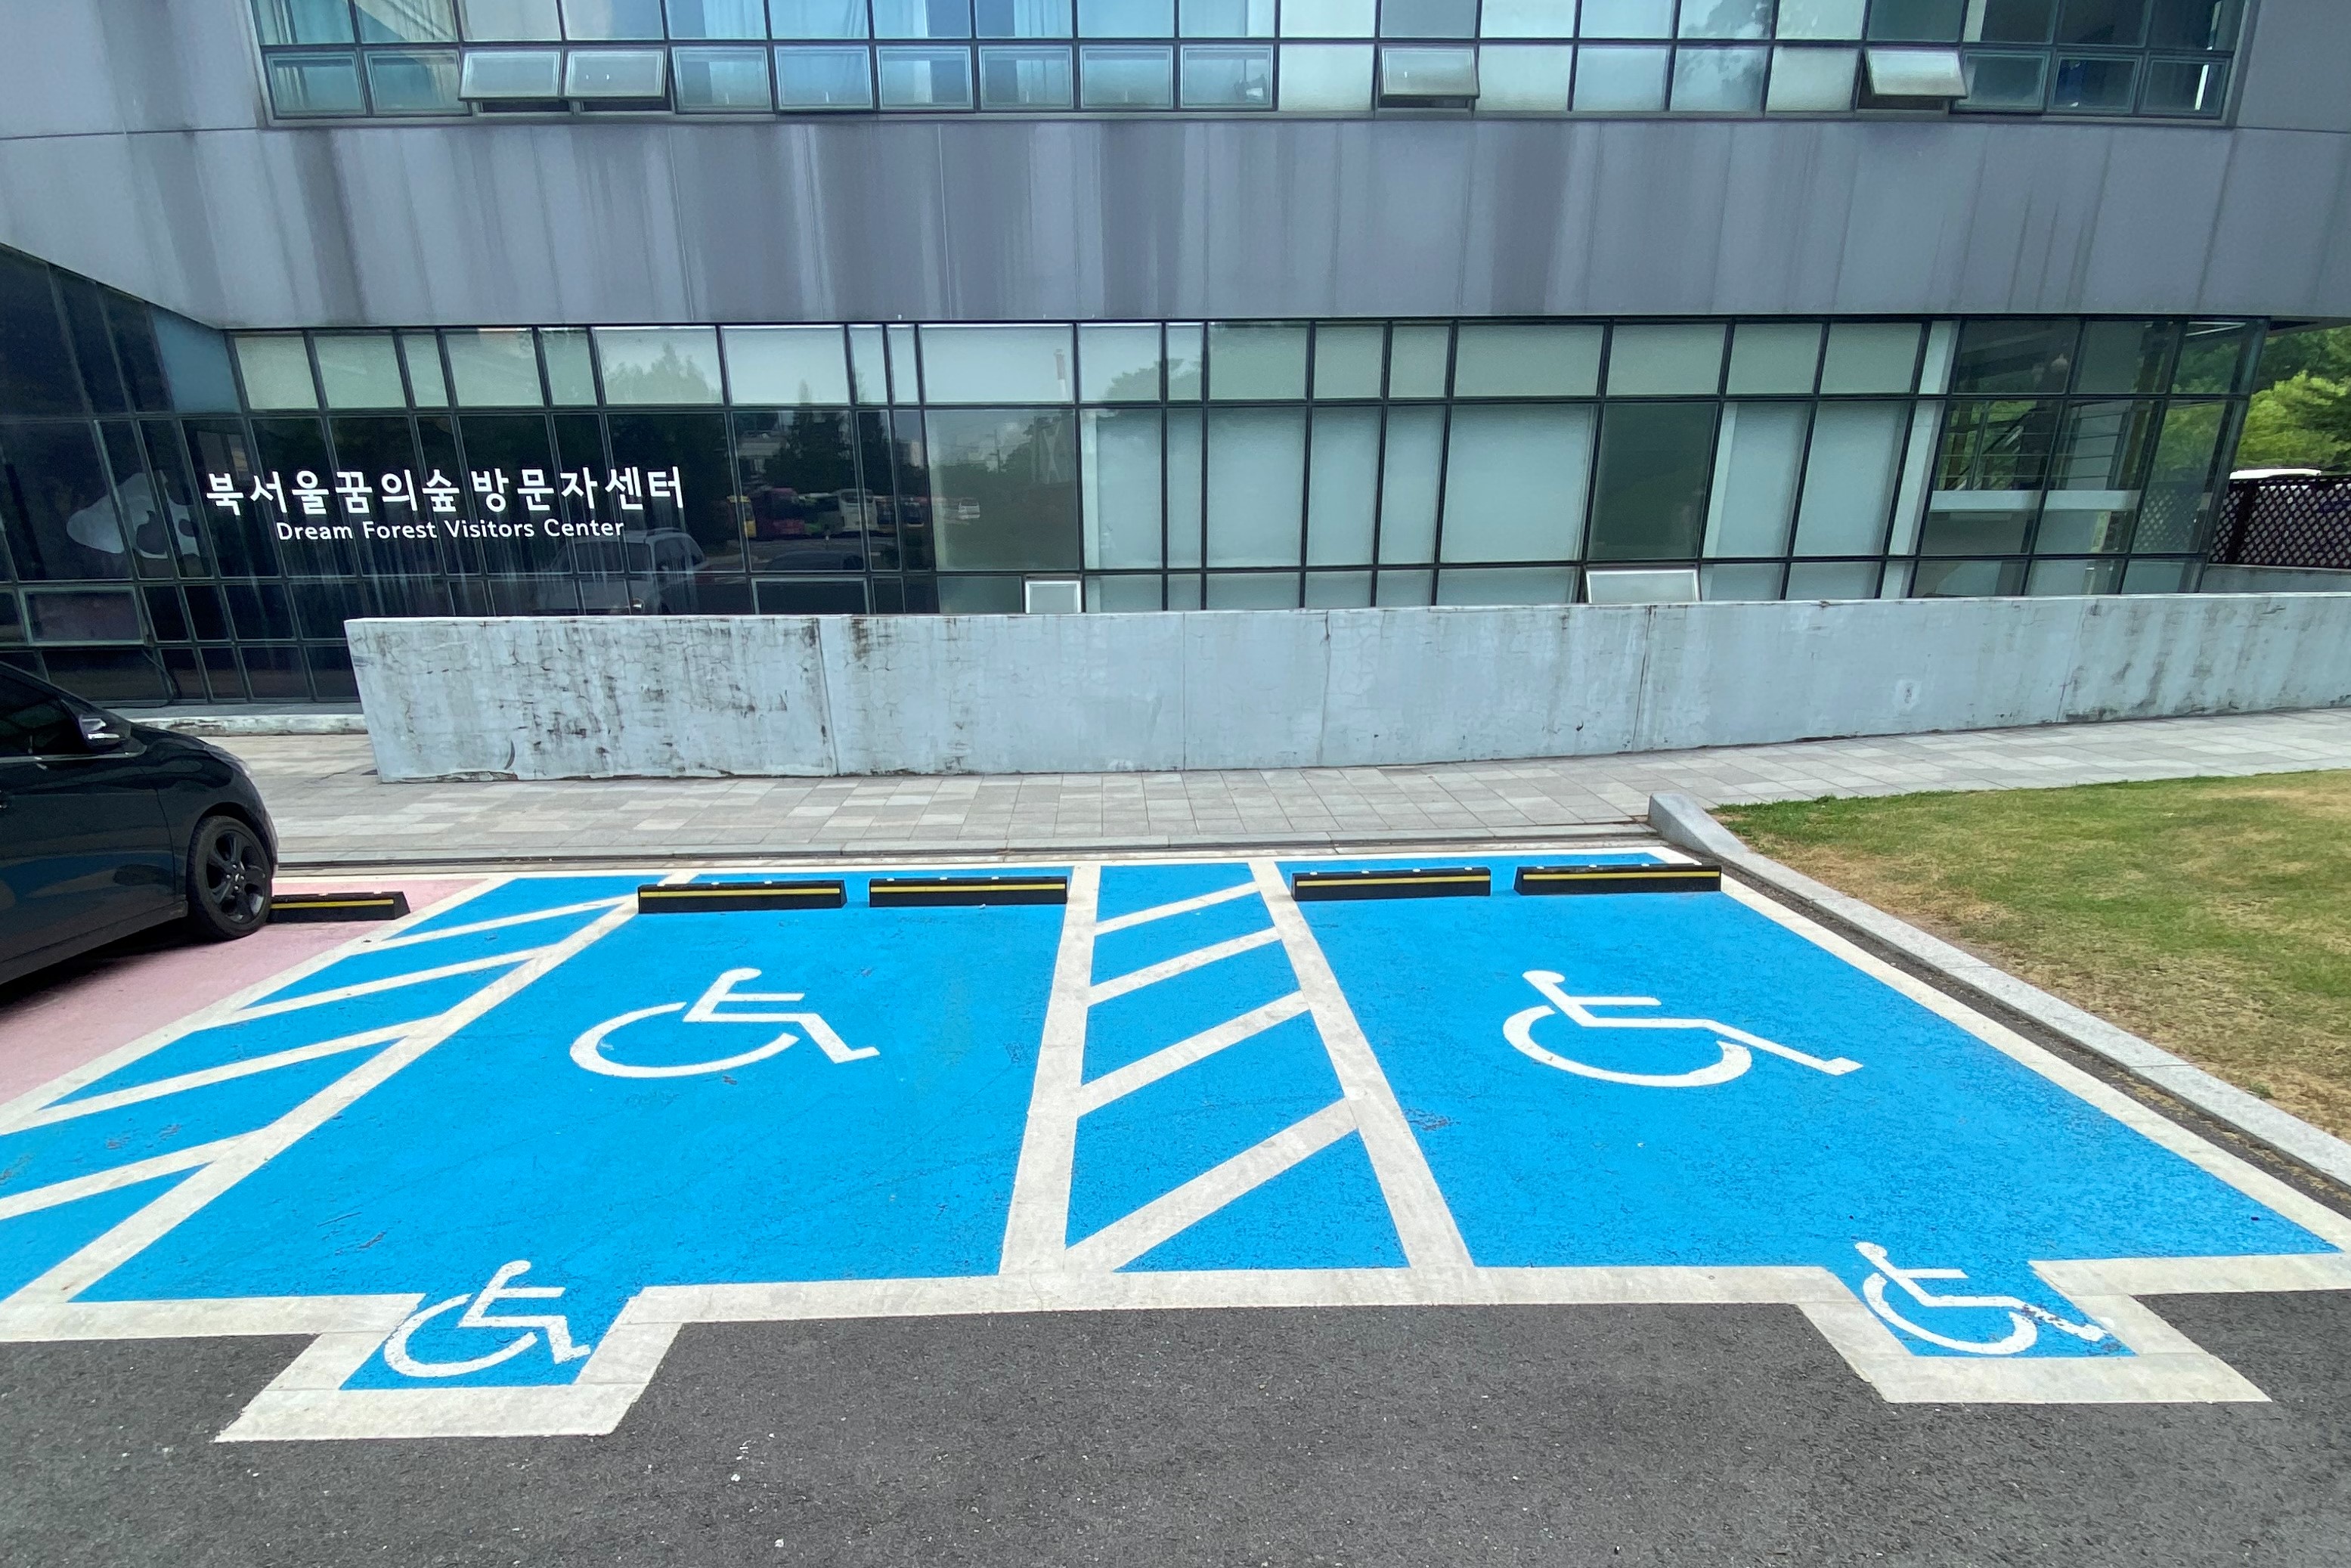 Parking facilities for persons with disabilities0 : Outdoor parking spaces for the persons with disabilities 
